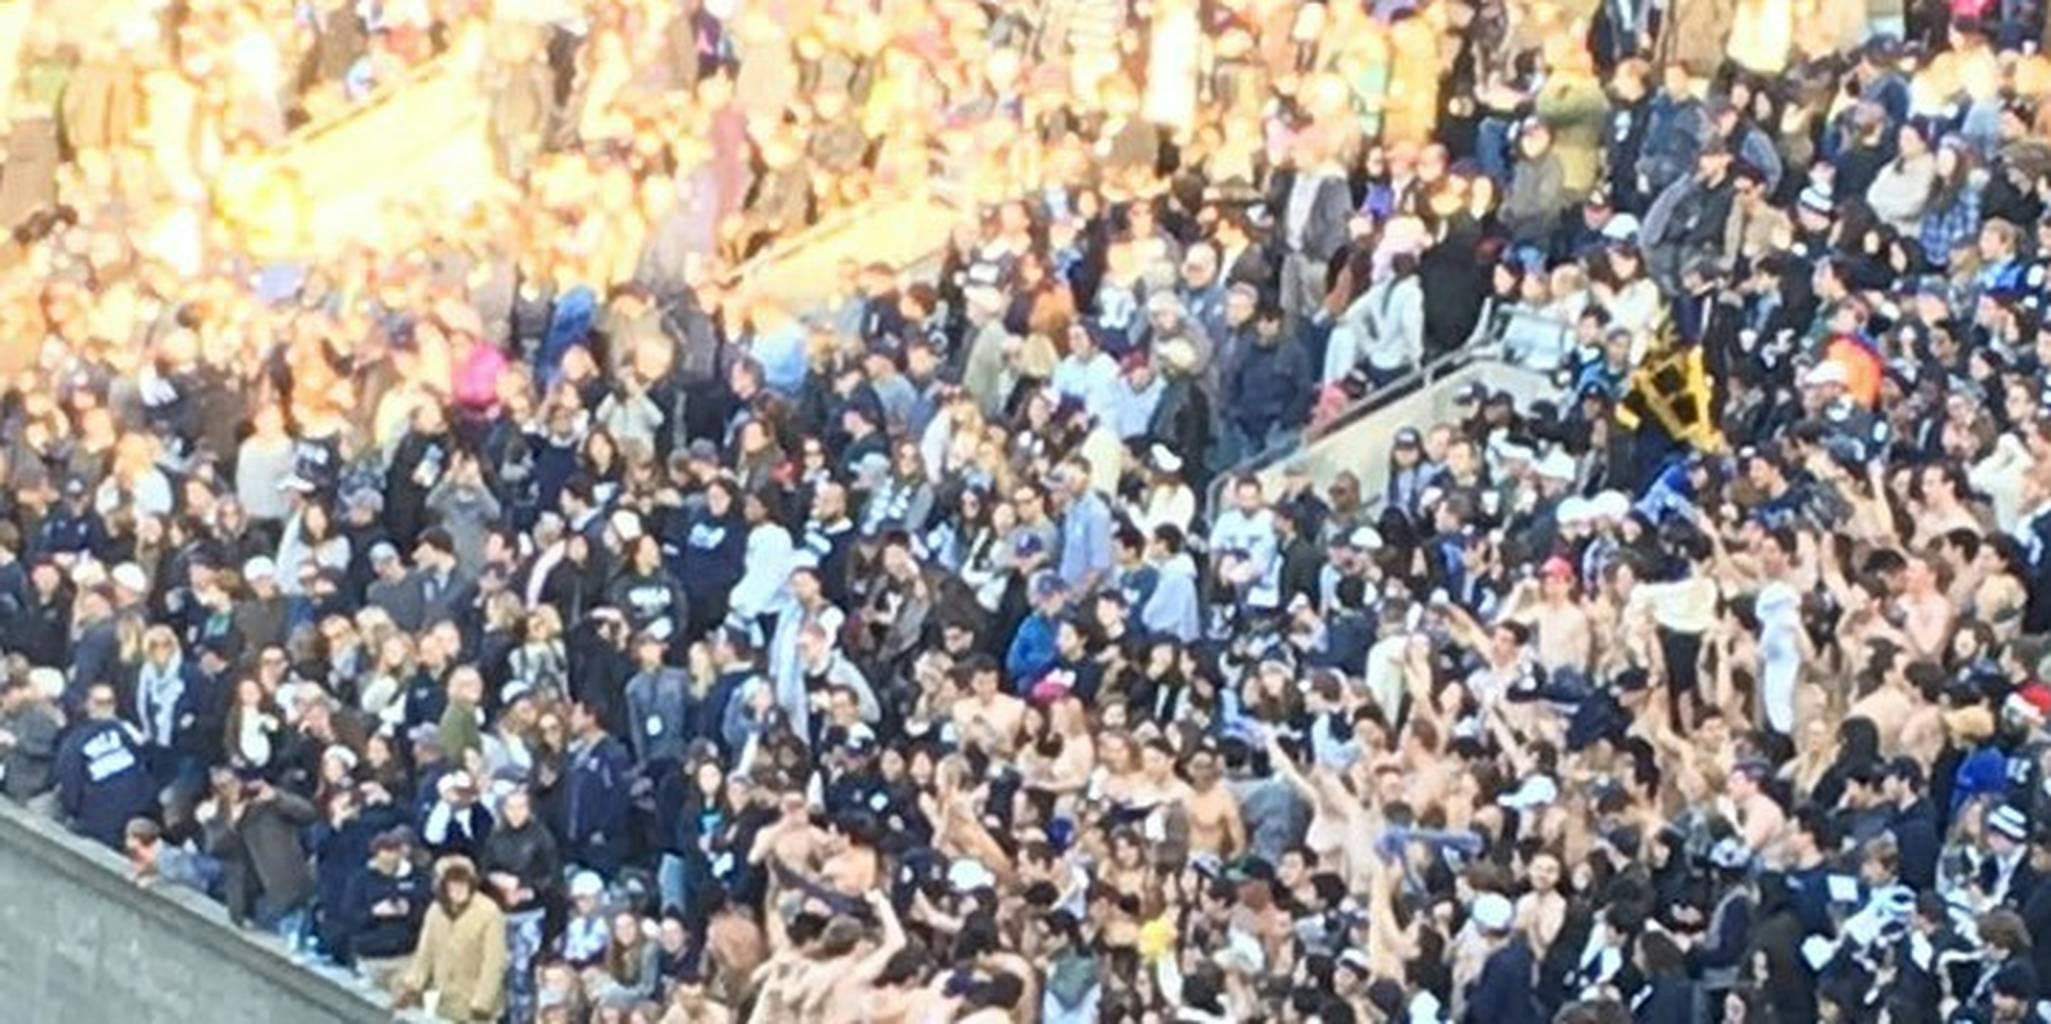 Harvard-Yale football game delayed because a bunch of students stripped naked